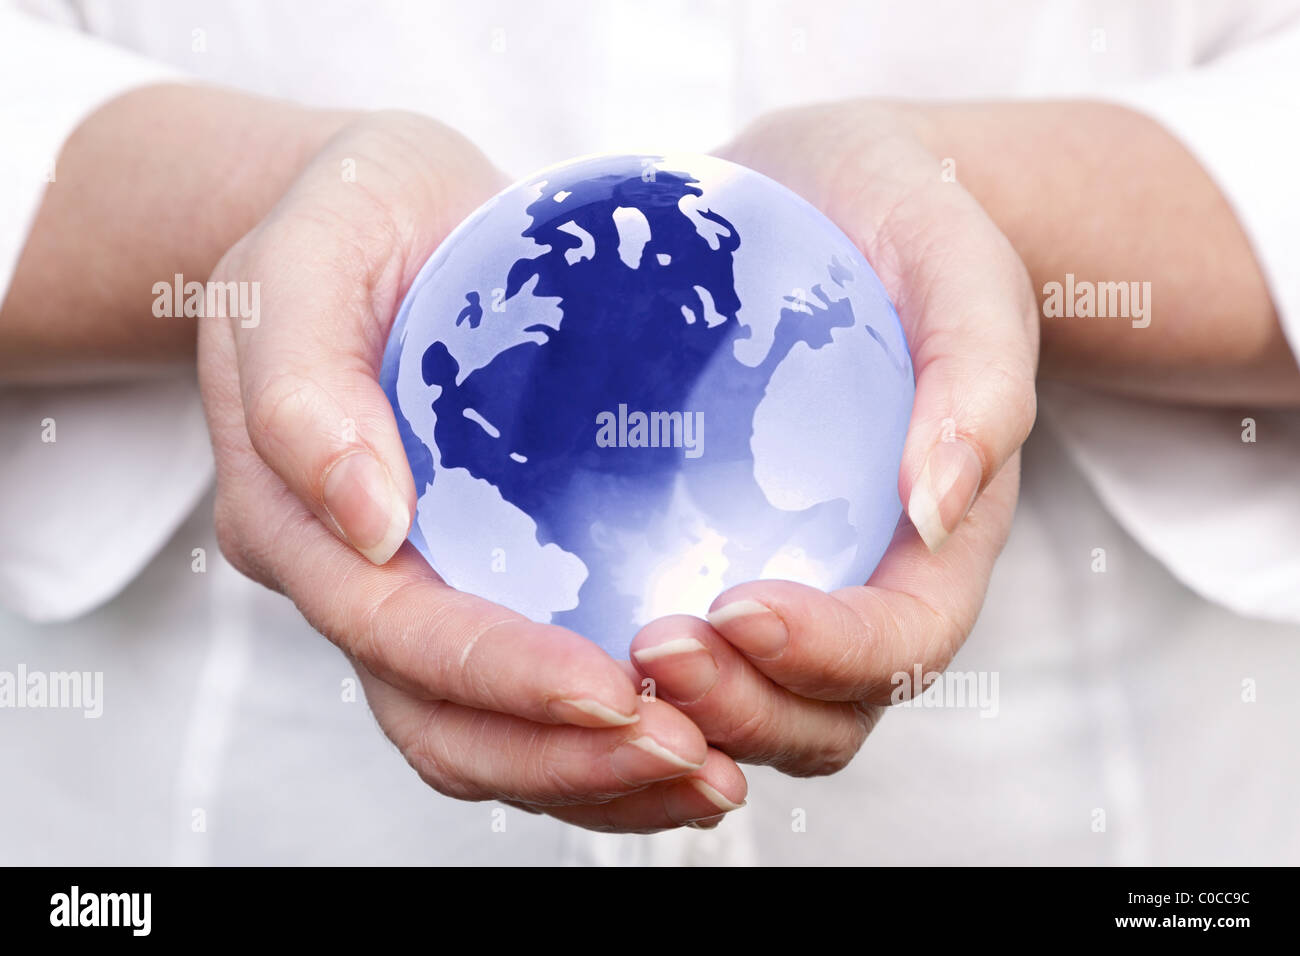 Photo of a woman holding a glass globe in her hands, concept image for worldwide and global related themes. Stock Photo